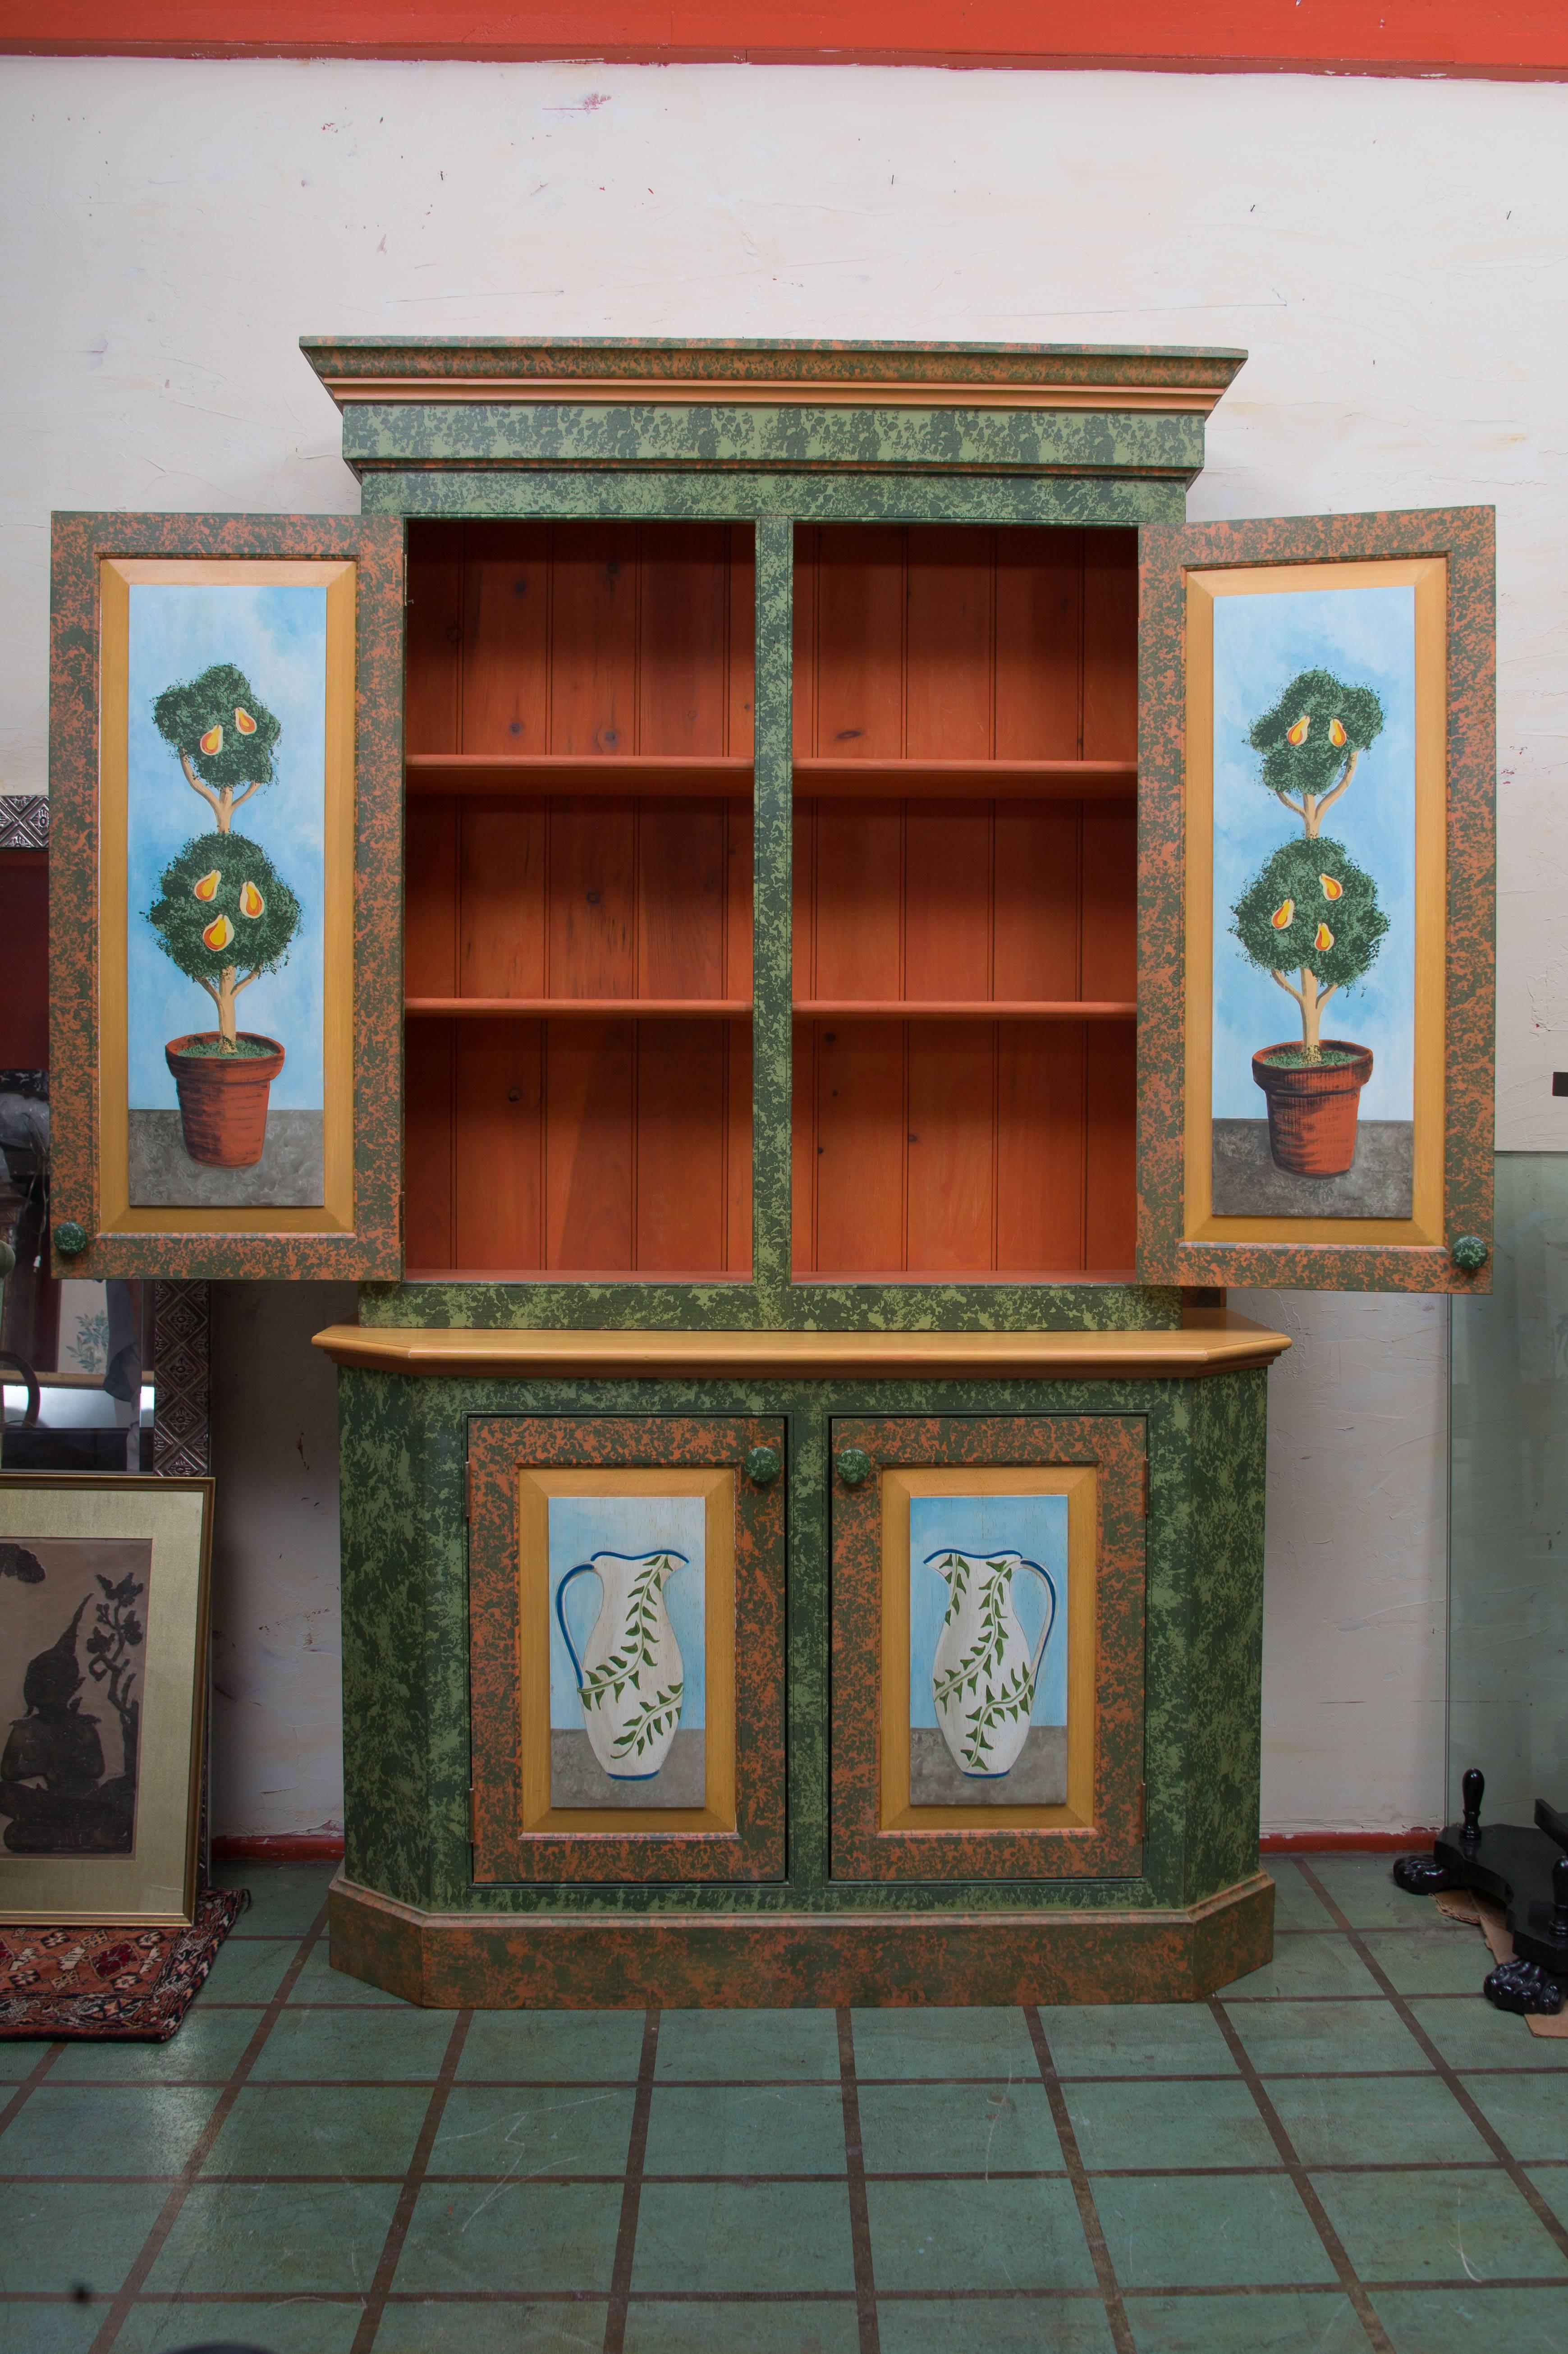 This hand-painted cabinet 'pops' with color and will make any room come alive. The top cabinet doors are painted with fruited topiaries in terra cotta pots in a natural setting. They open to a painted interior with shelving. The bottom section doors